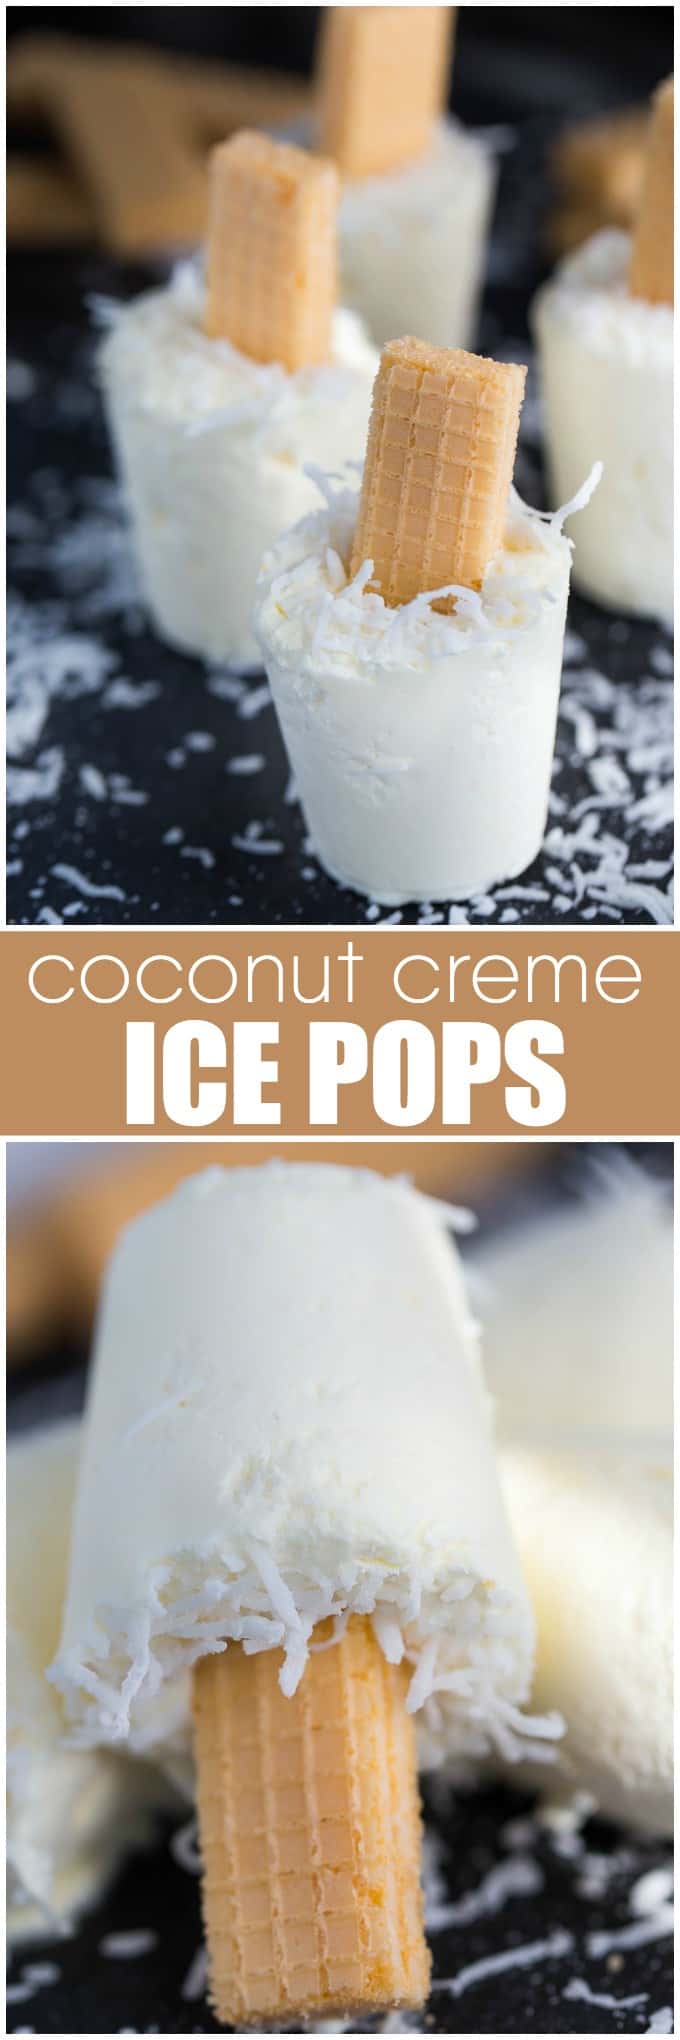 Coconut Creme Ice Pops - Cold, creamy and perfectly sweet! This summer treat tastes like a coconut cream pie.